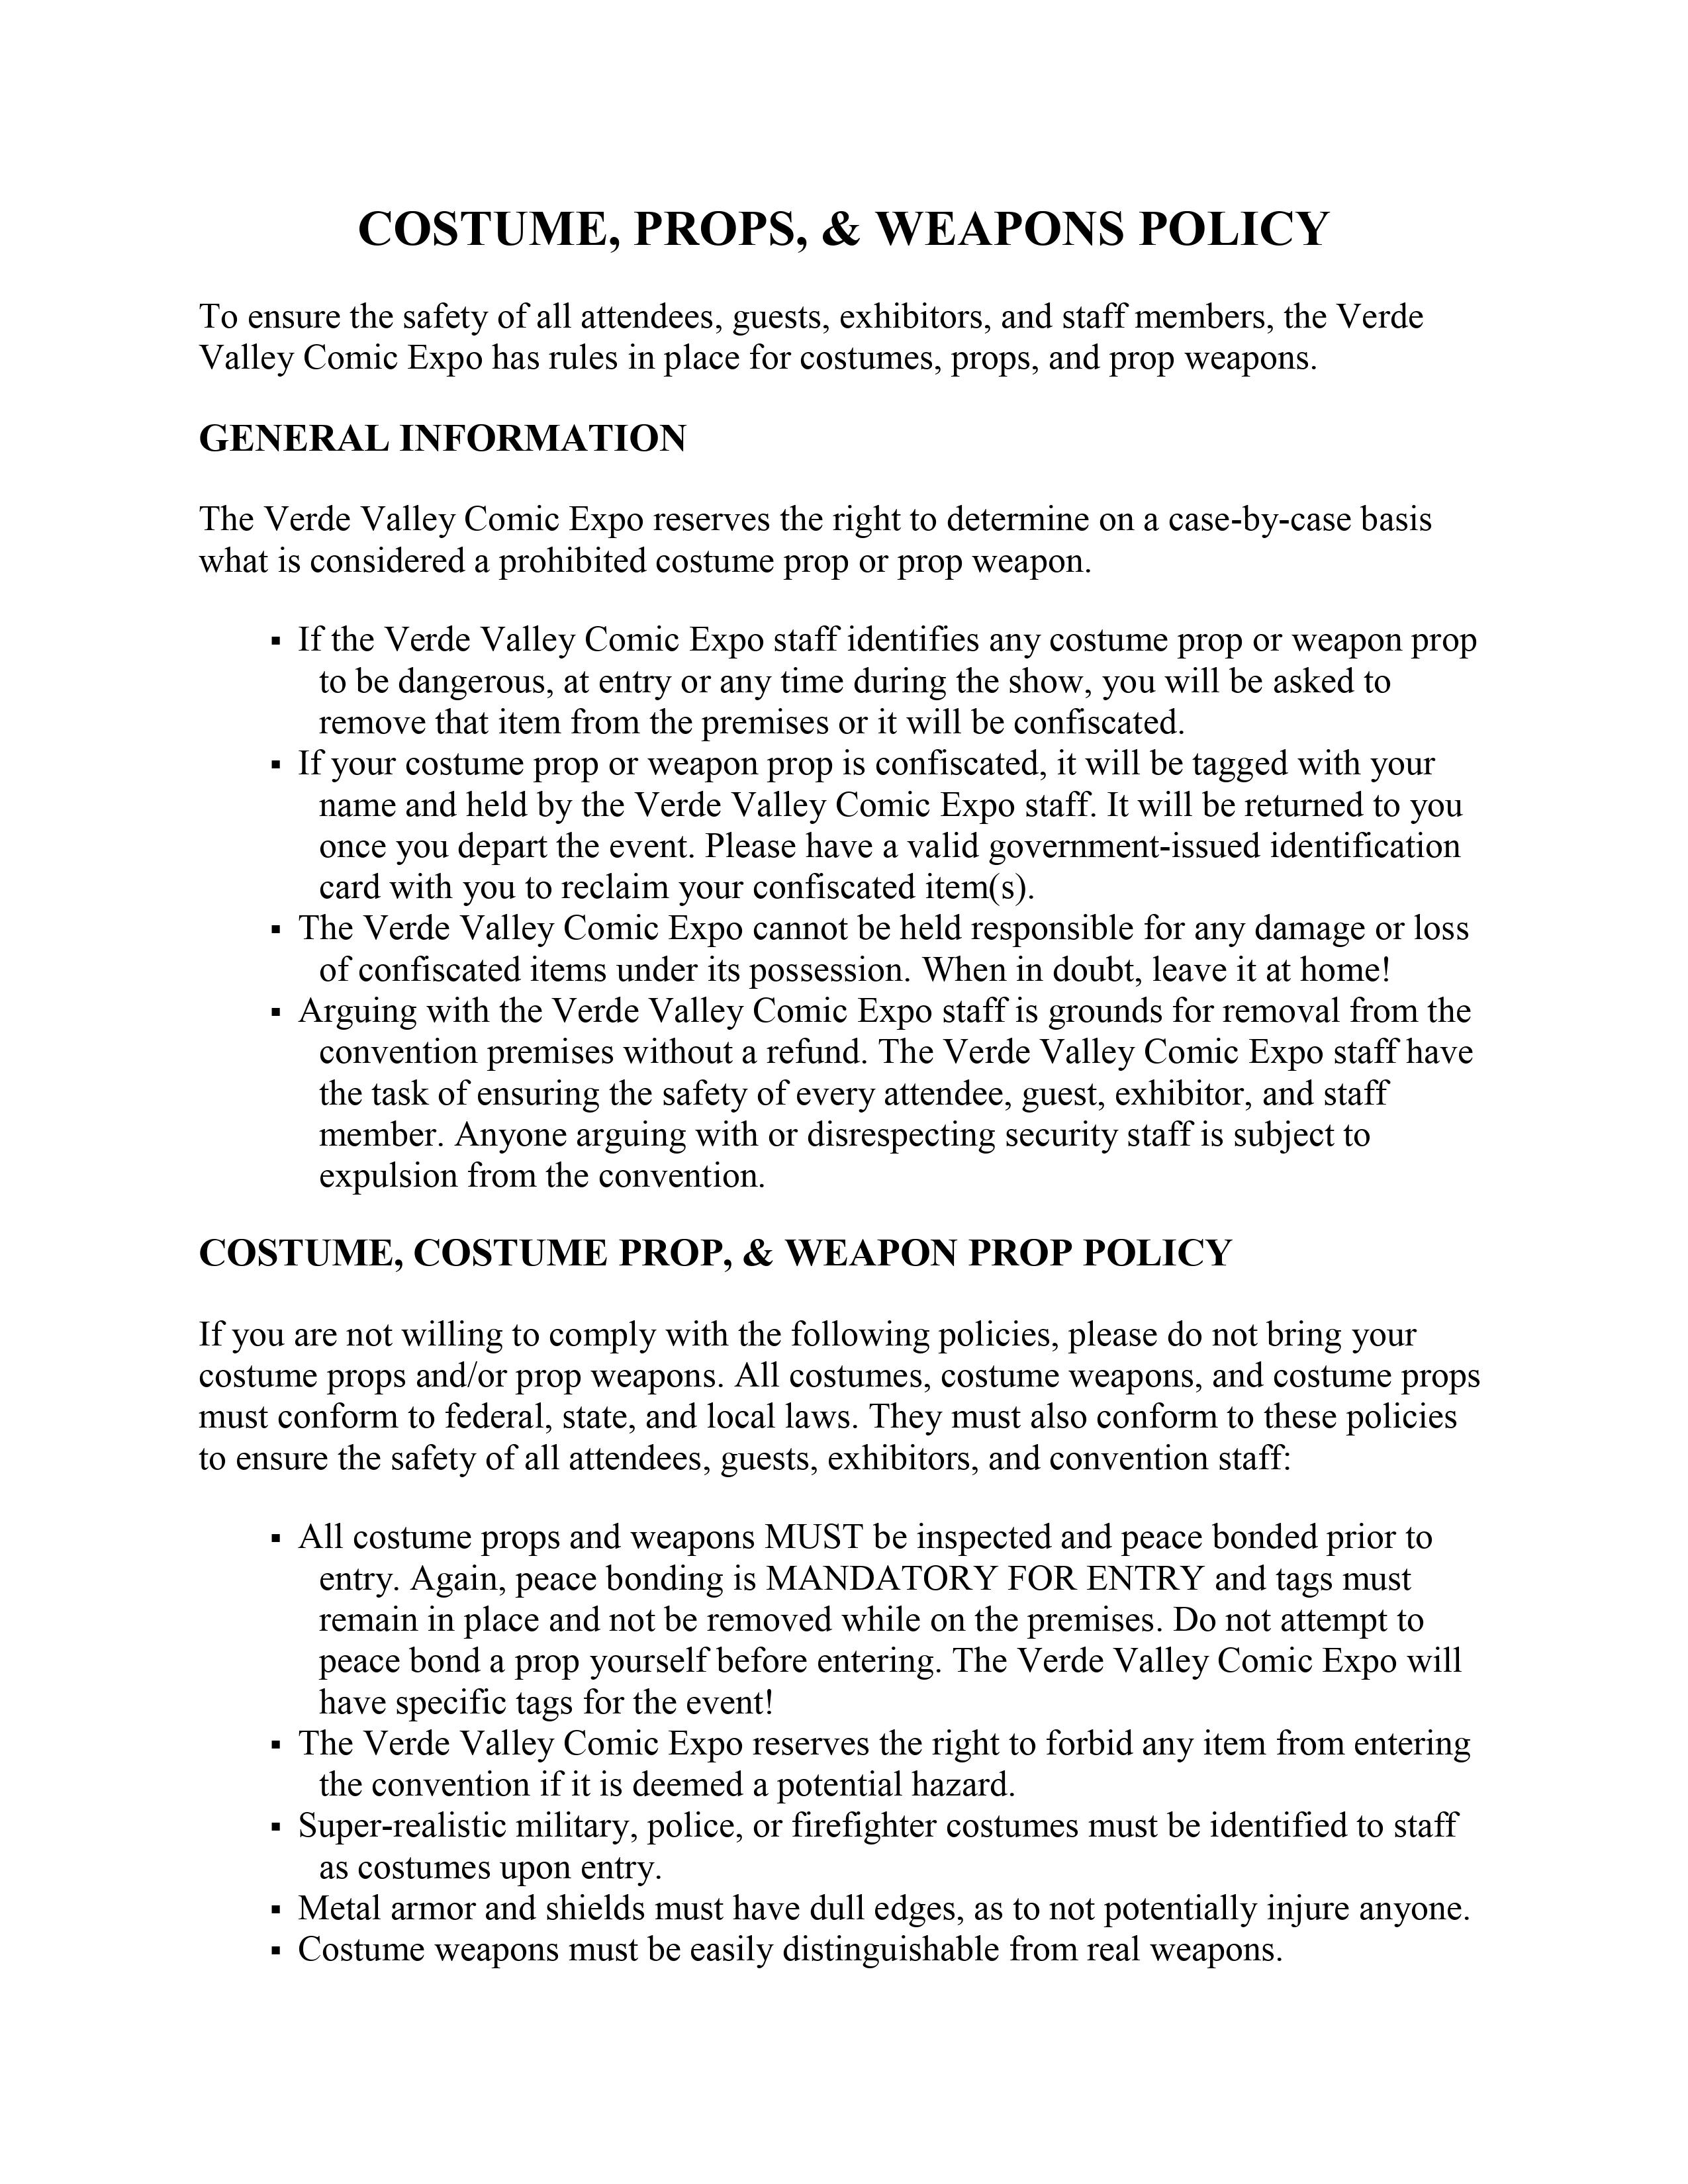 Screenshot of the Verde Valley Comic Expo Costume, Props, and Weapons Policy, page 1.